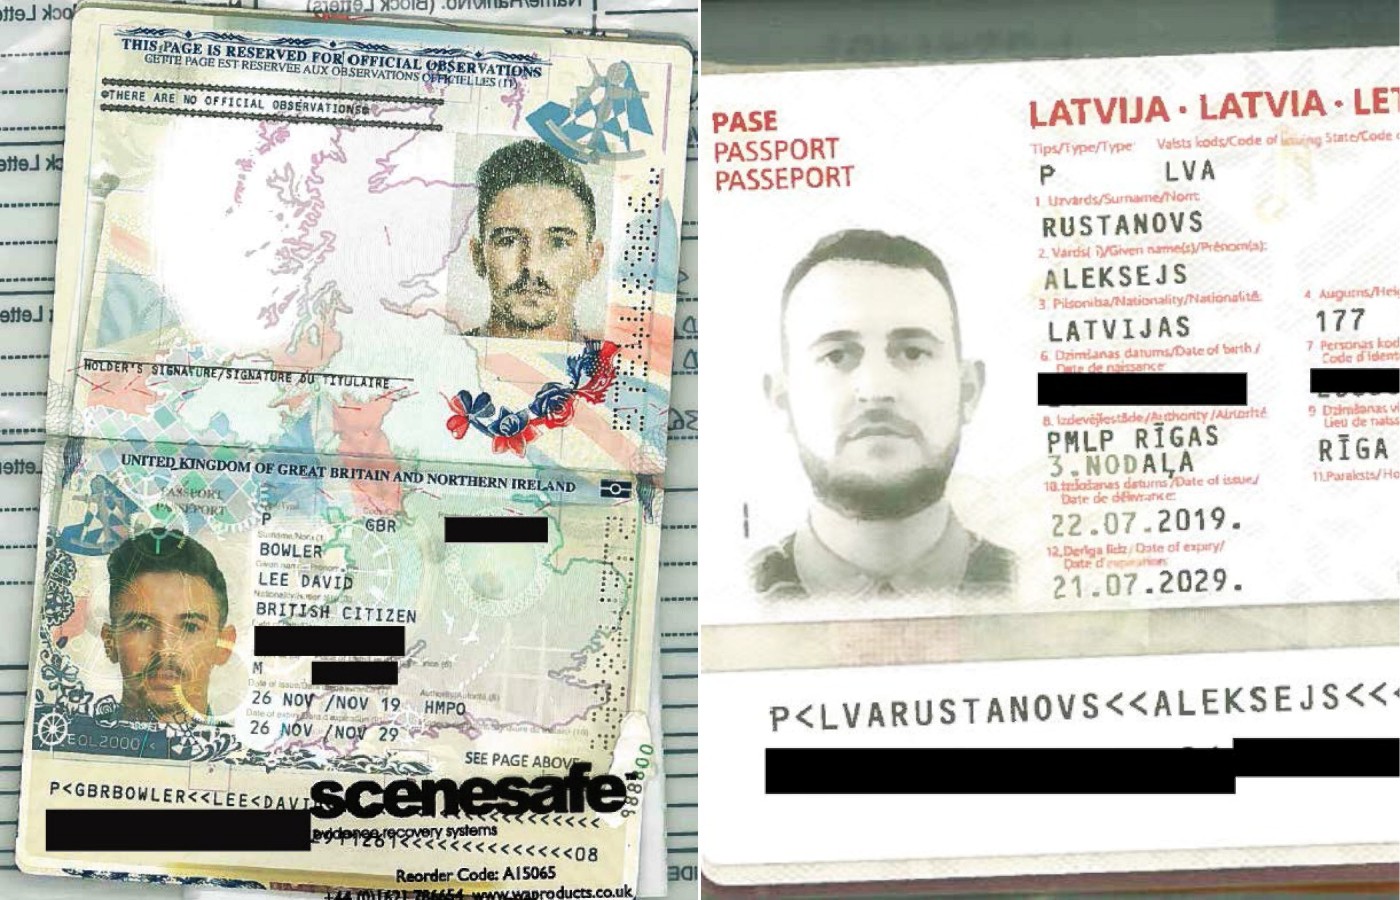 FOG UK passport issued to Jordan Owens in the name of Lee Bowler and FOG Latvian passport in the name of Aleksejs Rustanovs issued to Christopher Hughes.